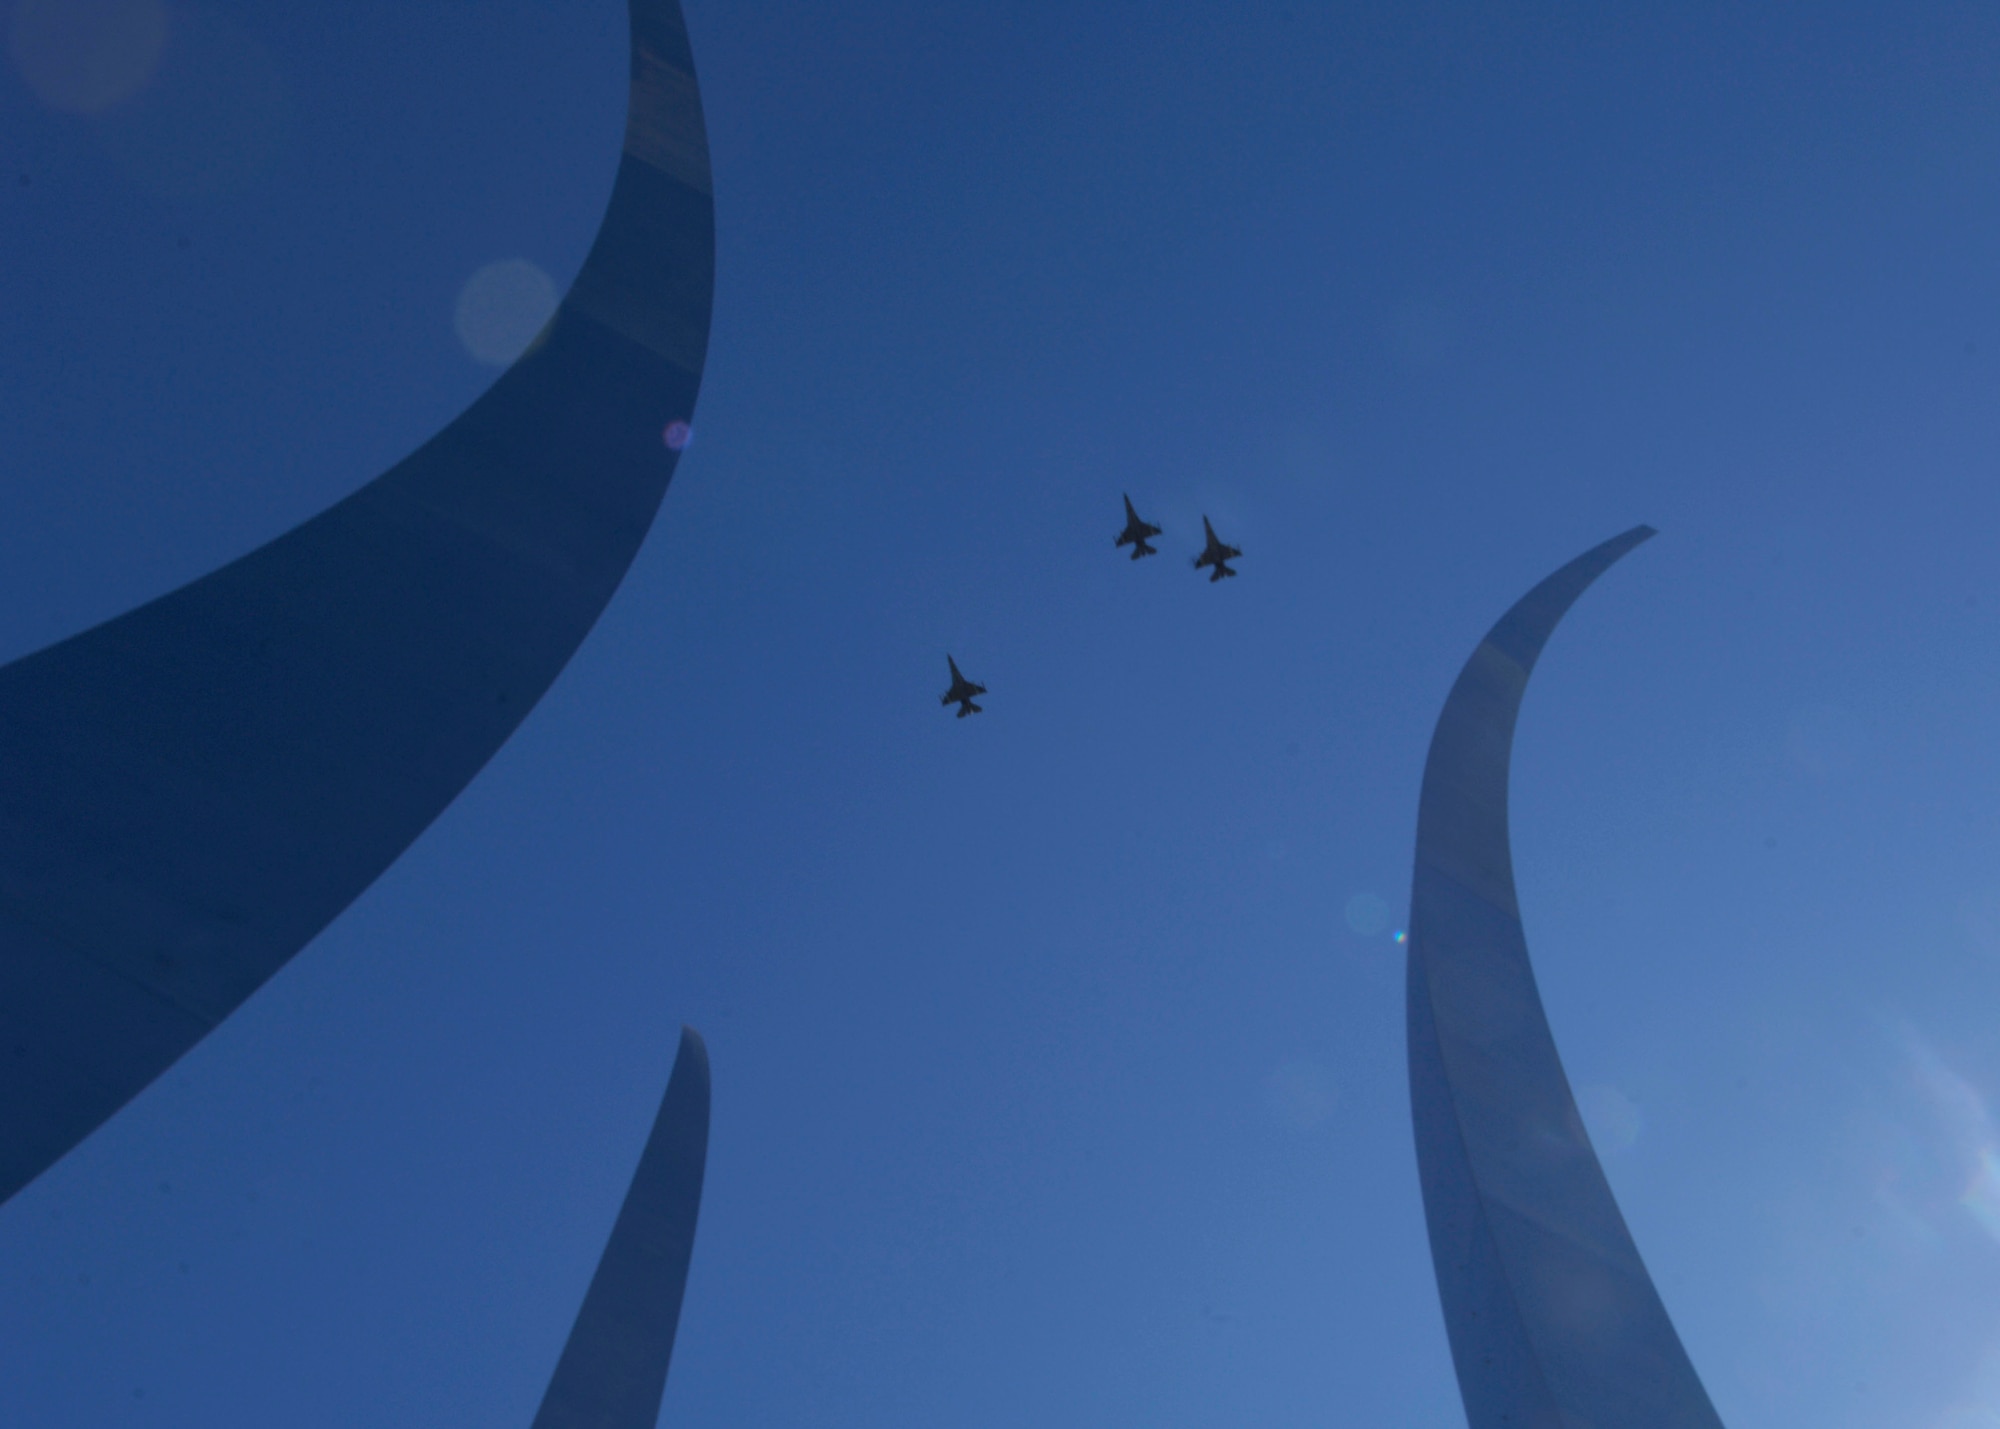 The Air Force Thunderbirds flew over the new Air Force Memorial in the "Missing Man" formation at the conclusion of the wreath dedication ceremony led by Secretary of the Air Force Michael W. Wynne, whom with the help of Air Force Chief of Staff T. Michael Mosely and Air Force Memorial Foudation Chairman Ross Perot, Jr., Chief Master Sergeant of the Air Force Rodney J. McKinley and former Secretaries of the Air Force, Chief of Staffs and Chief Master Sergeants of the Air Force  officially closed the Air Force Memorial commemoration weekend with a wreath laying ceremony in Arlington, Va., Oct. 15, 2006. On behalf of all American citizens President George W. Bush accepted the Air Force Memorial from Air Force Memorial Foundation Chairman Ross Perot Jr. during the previous day's dedication ceremony at the base of the Air Force Memorial that overlooks the Pentagon.  Designed by the late James Ingo Freed the memorial with its three soaring spires inspired by the U.S. Air Force Thunderbirds bomb burst manuever, pays tribute to and honors the patriotic men and women of the U.S. Air Force and its predeccessor organizations. An open house was held near the Pentagon in conjunction with the dedication ceremony which featured performances by the U.S. Air Force Band, the U.S. Air Force Honor Guard drill team, and culminated with a concert featuring country music performer LeeAnn Womack. (U.S. Air Force photo/Tech. Sgt. Cohen Young) 